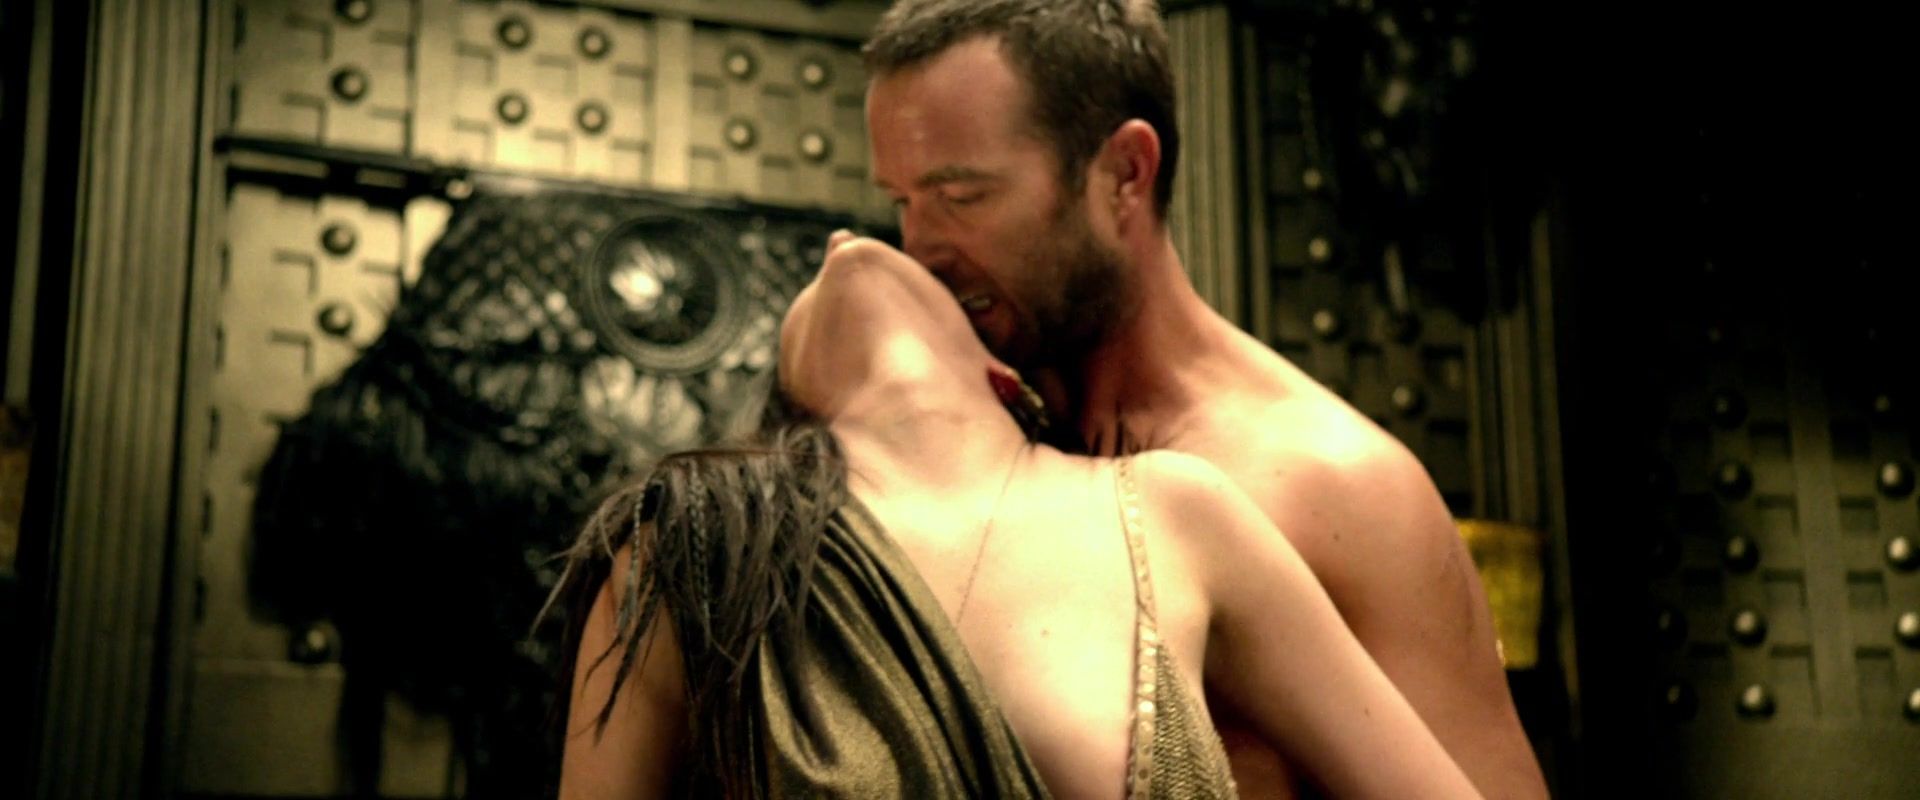 Gaysex Nude Celebs Scene Eva Green | The movie "300. Rise of an Empire" | Released in 2014 BootyVote